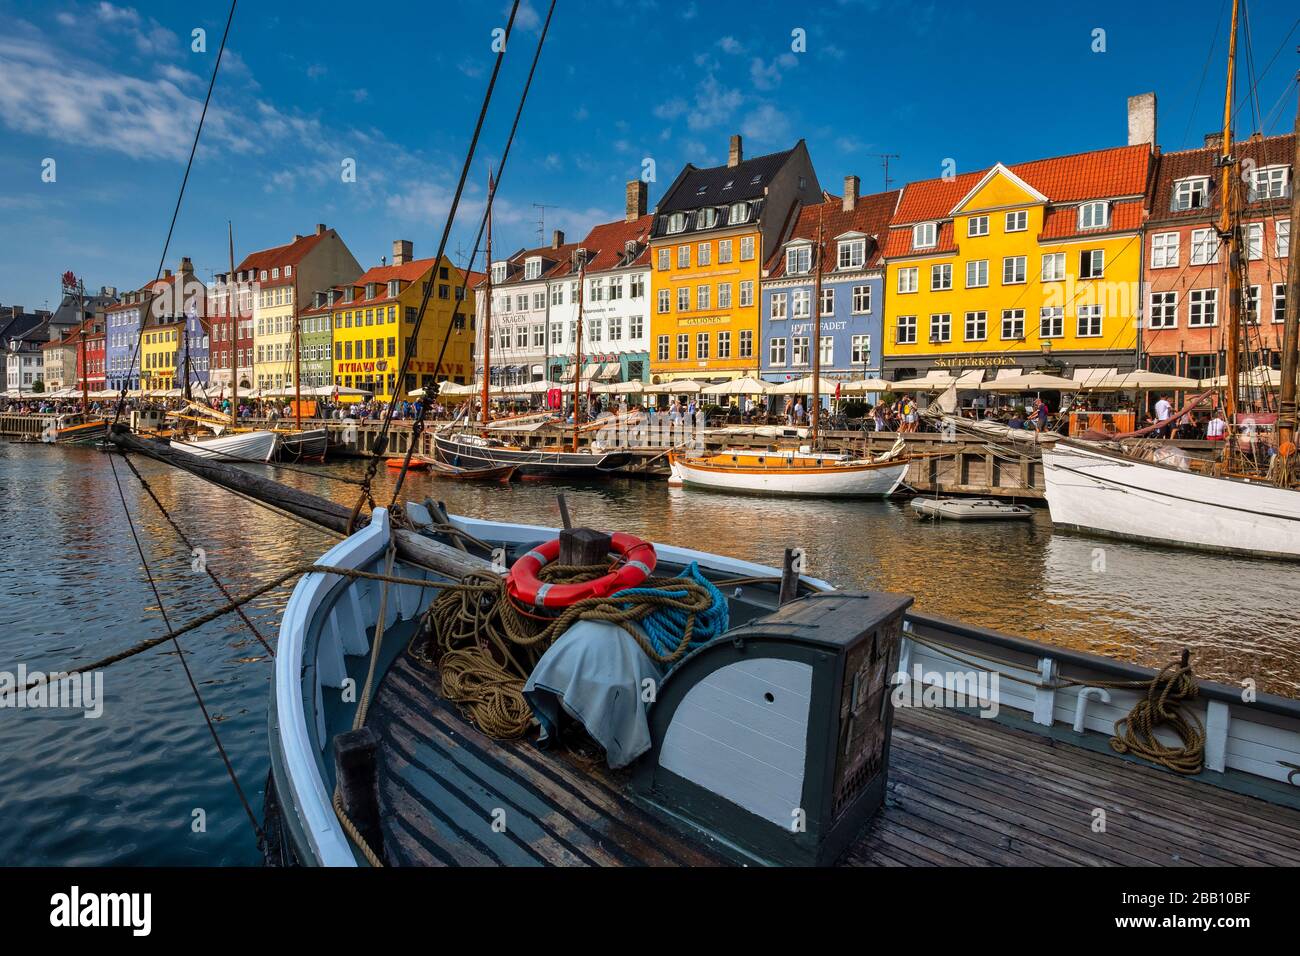 Row of colorful houses on the waterfront of the Nyhavn canal in Copenhagen, Denmark, Europe Stock Photo